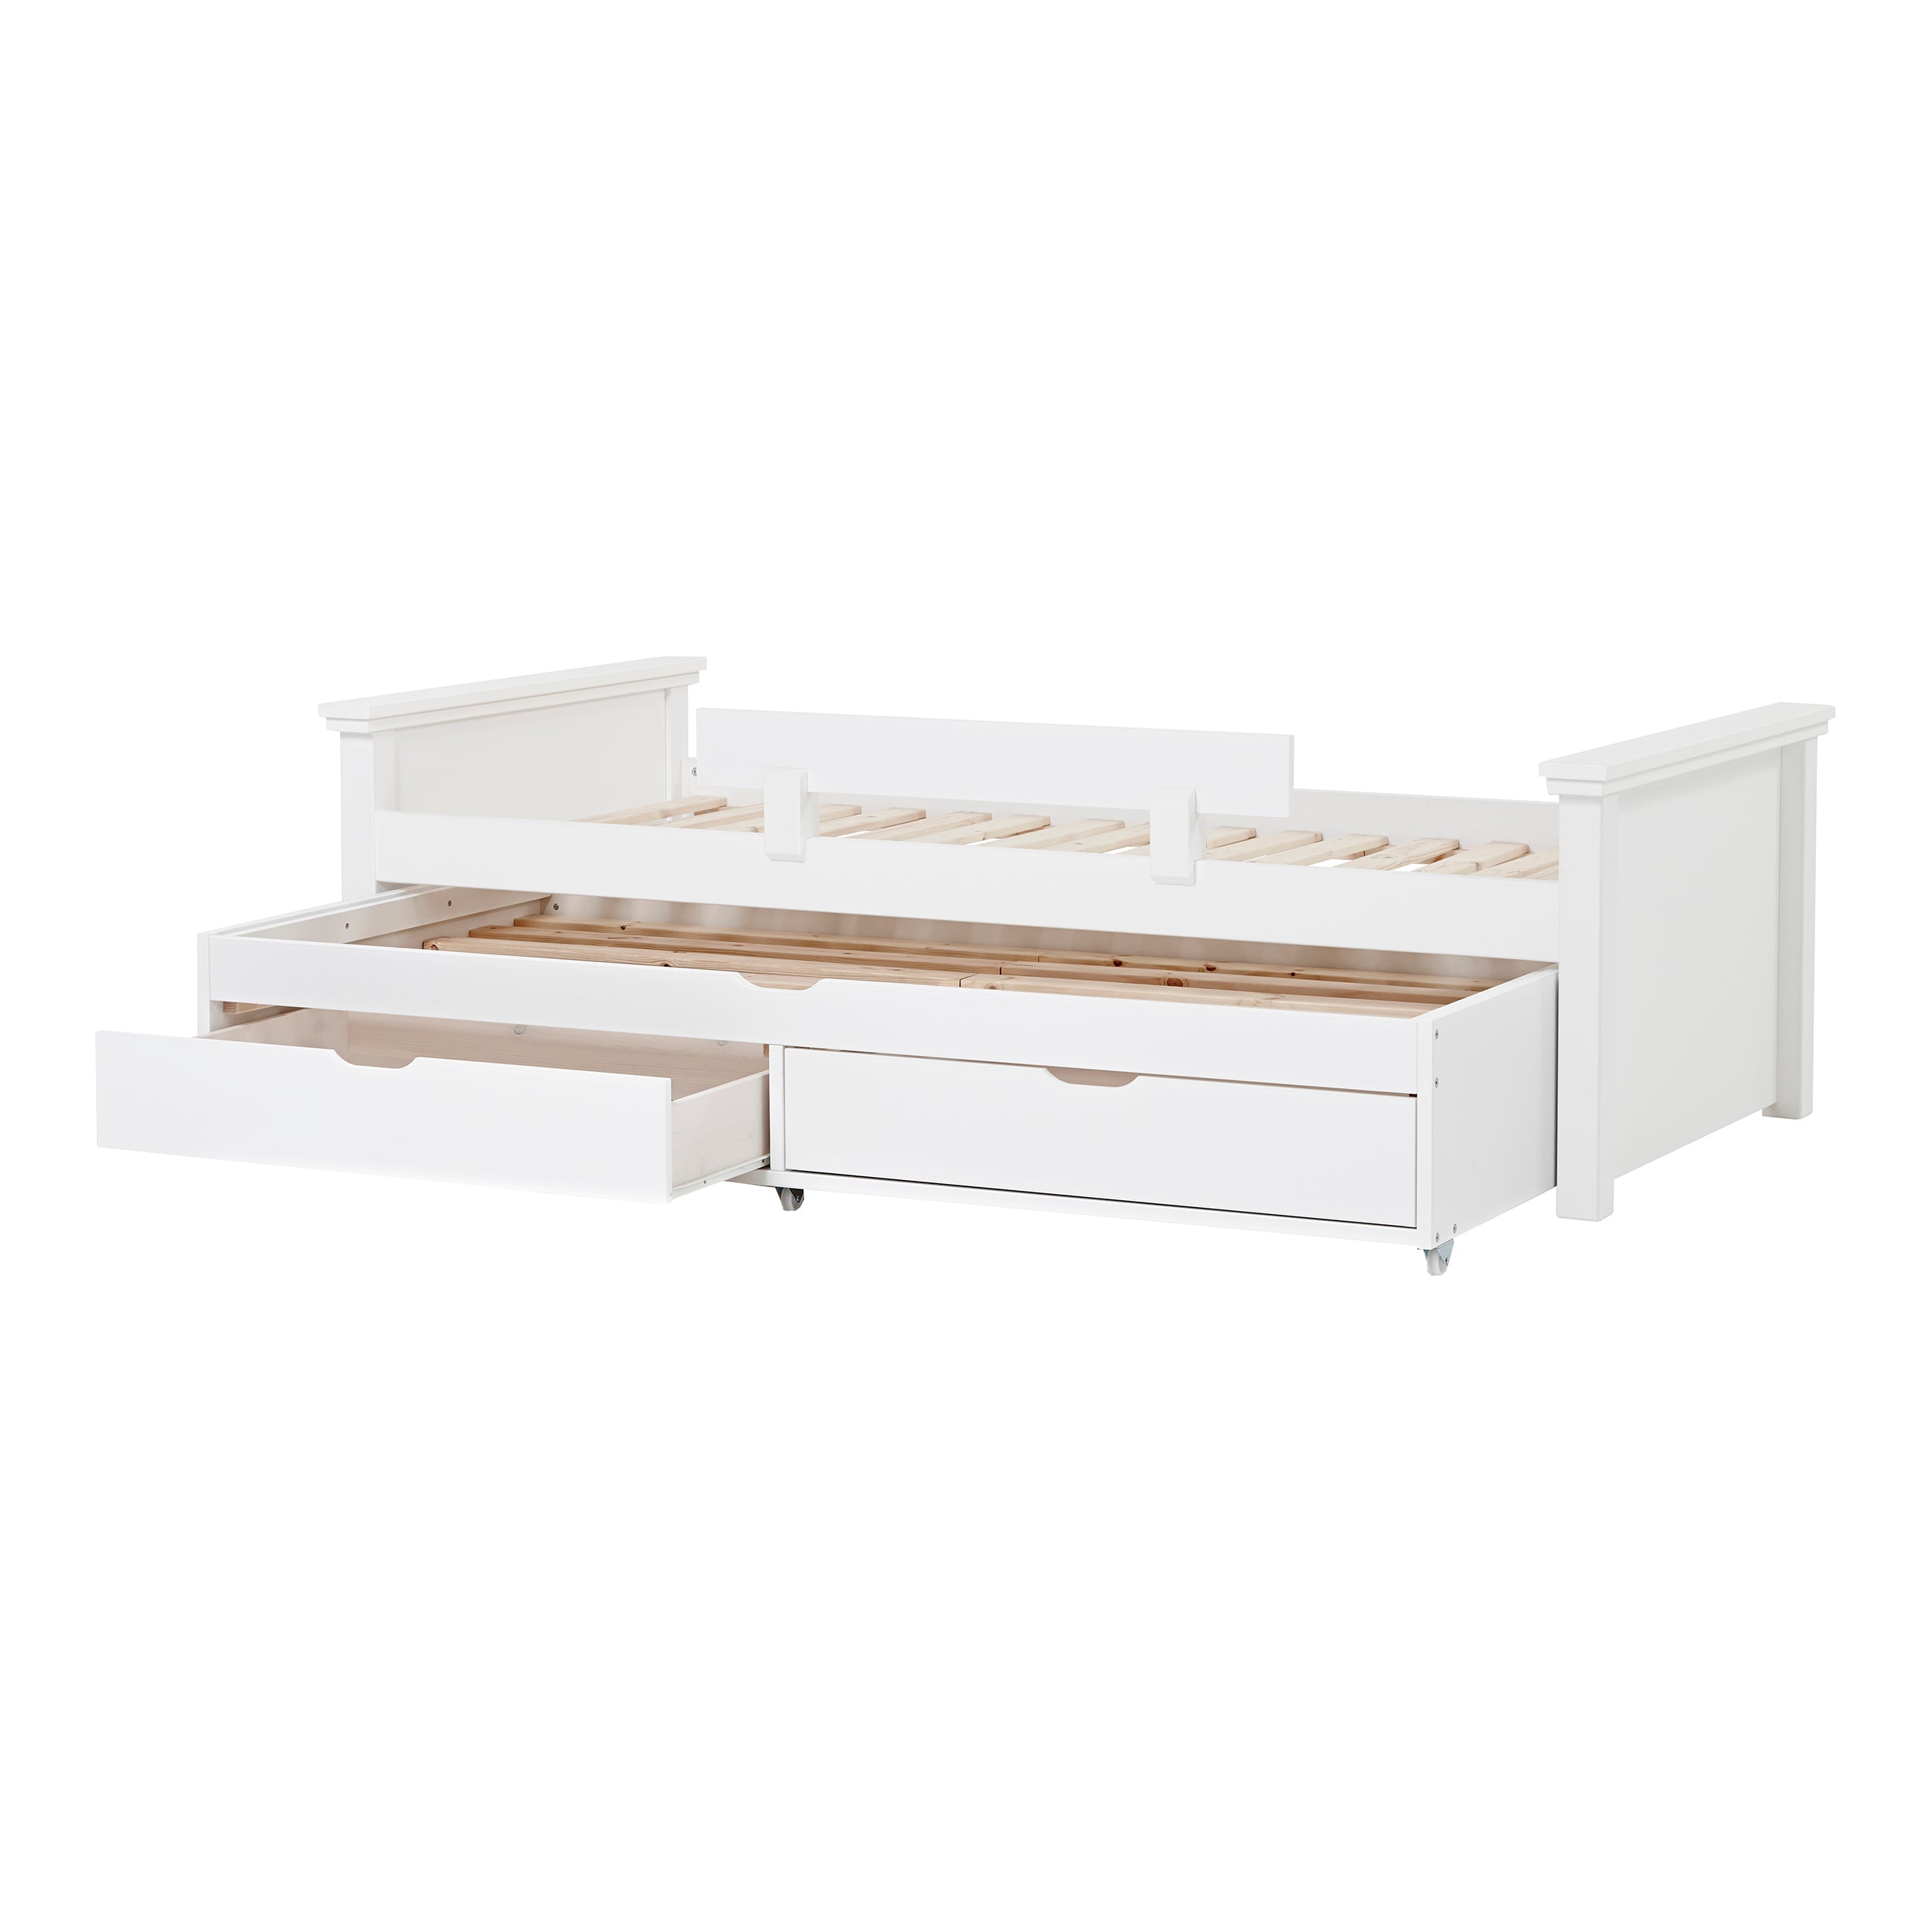 Hoppekids DELUXE 90x190 cm pull-out bed, White